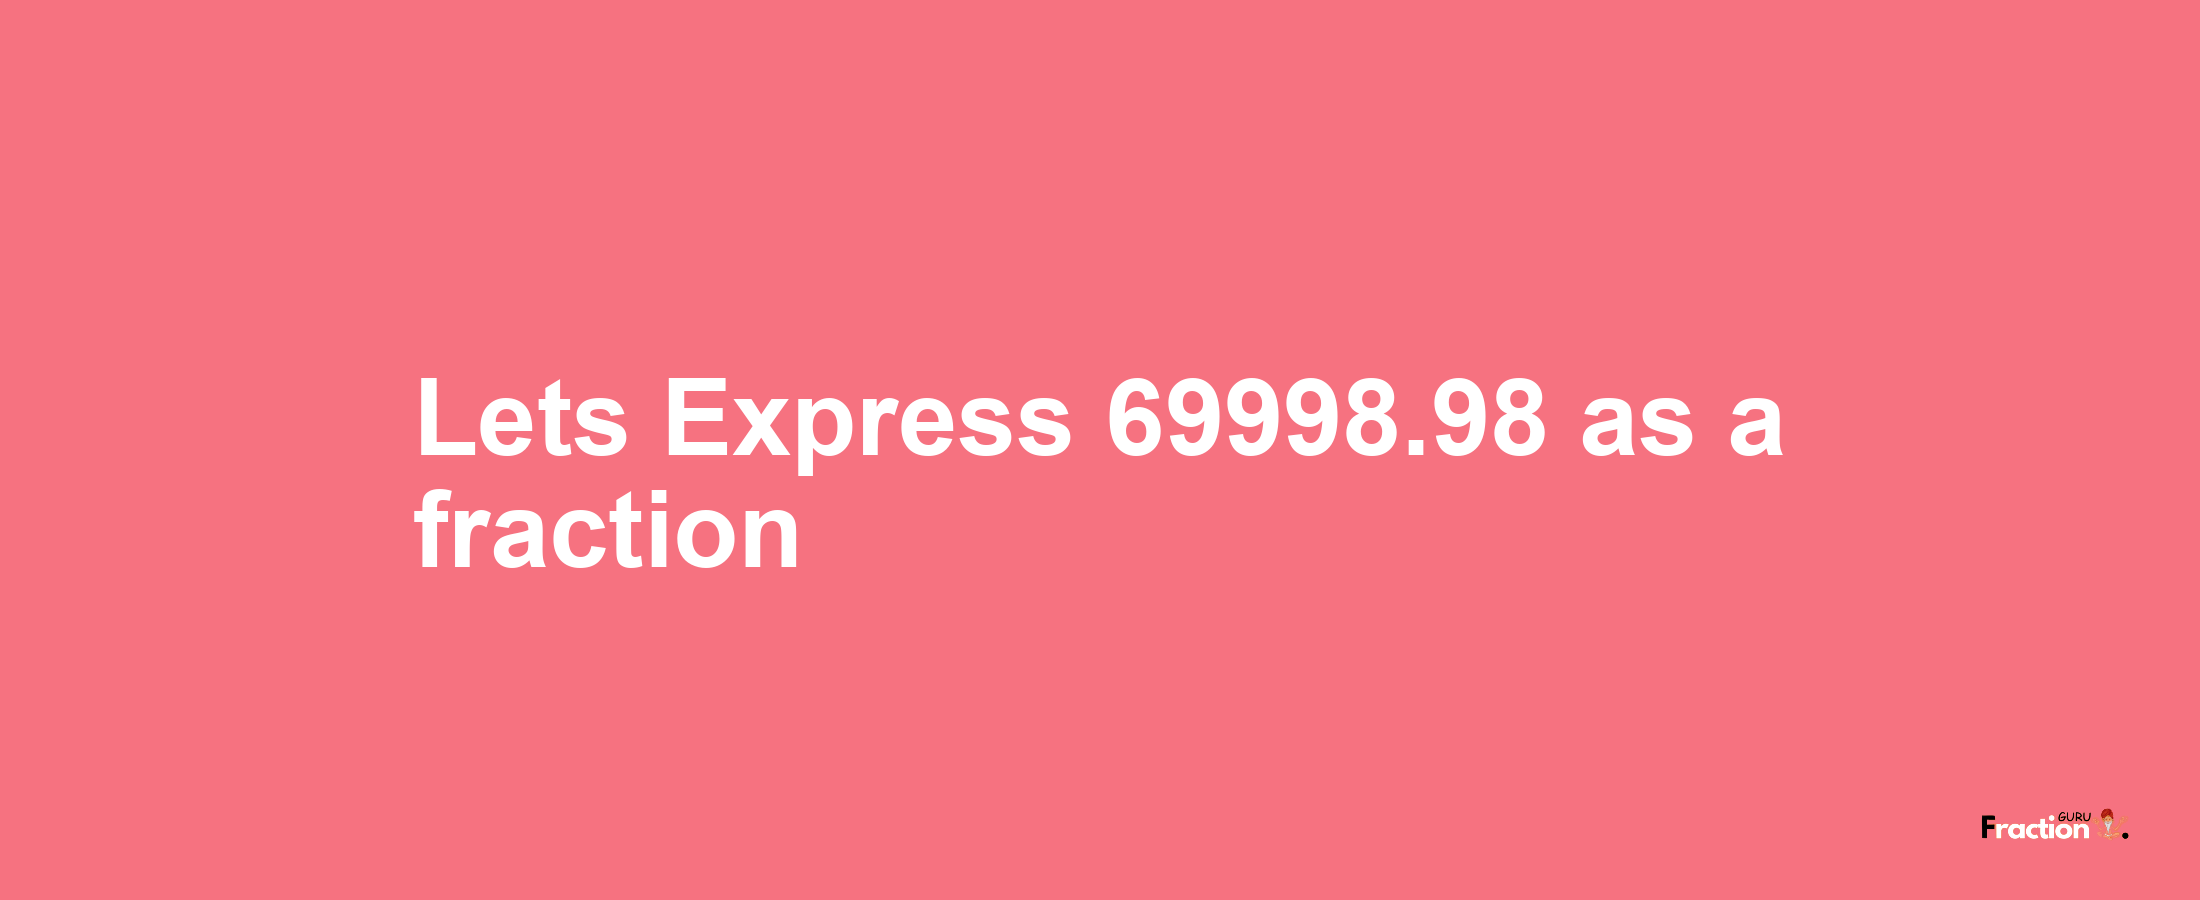 Lets Express 69998.98 as afraction